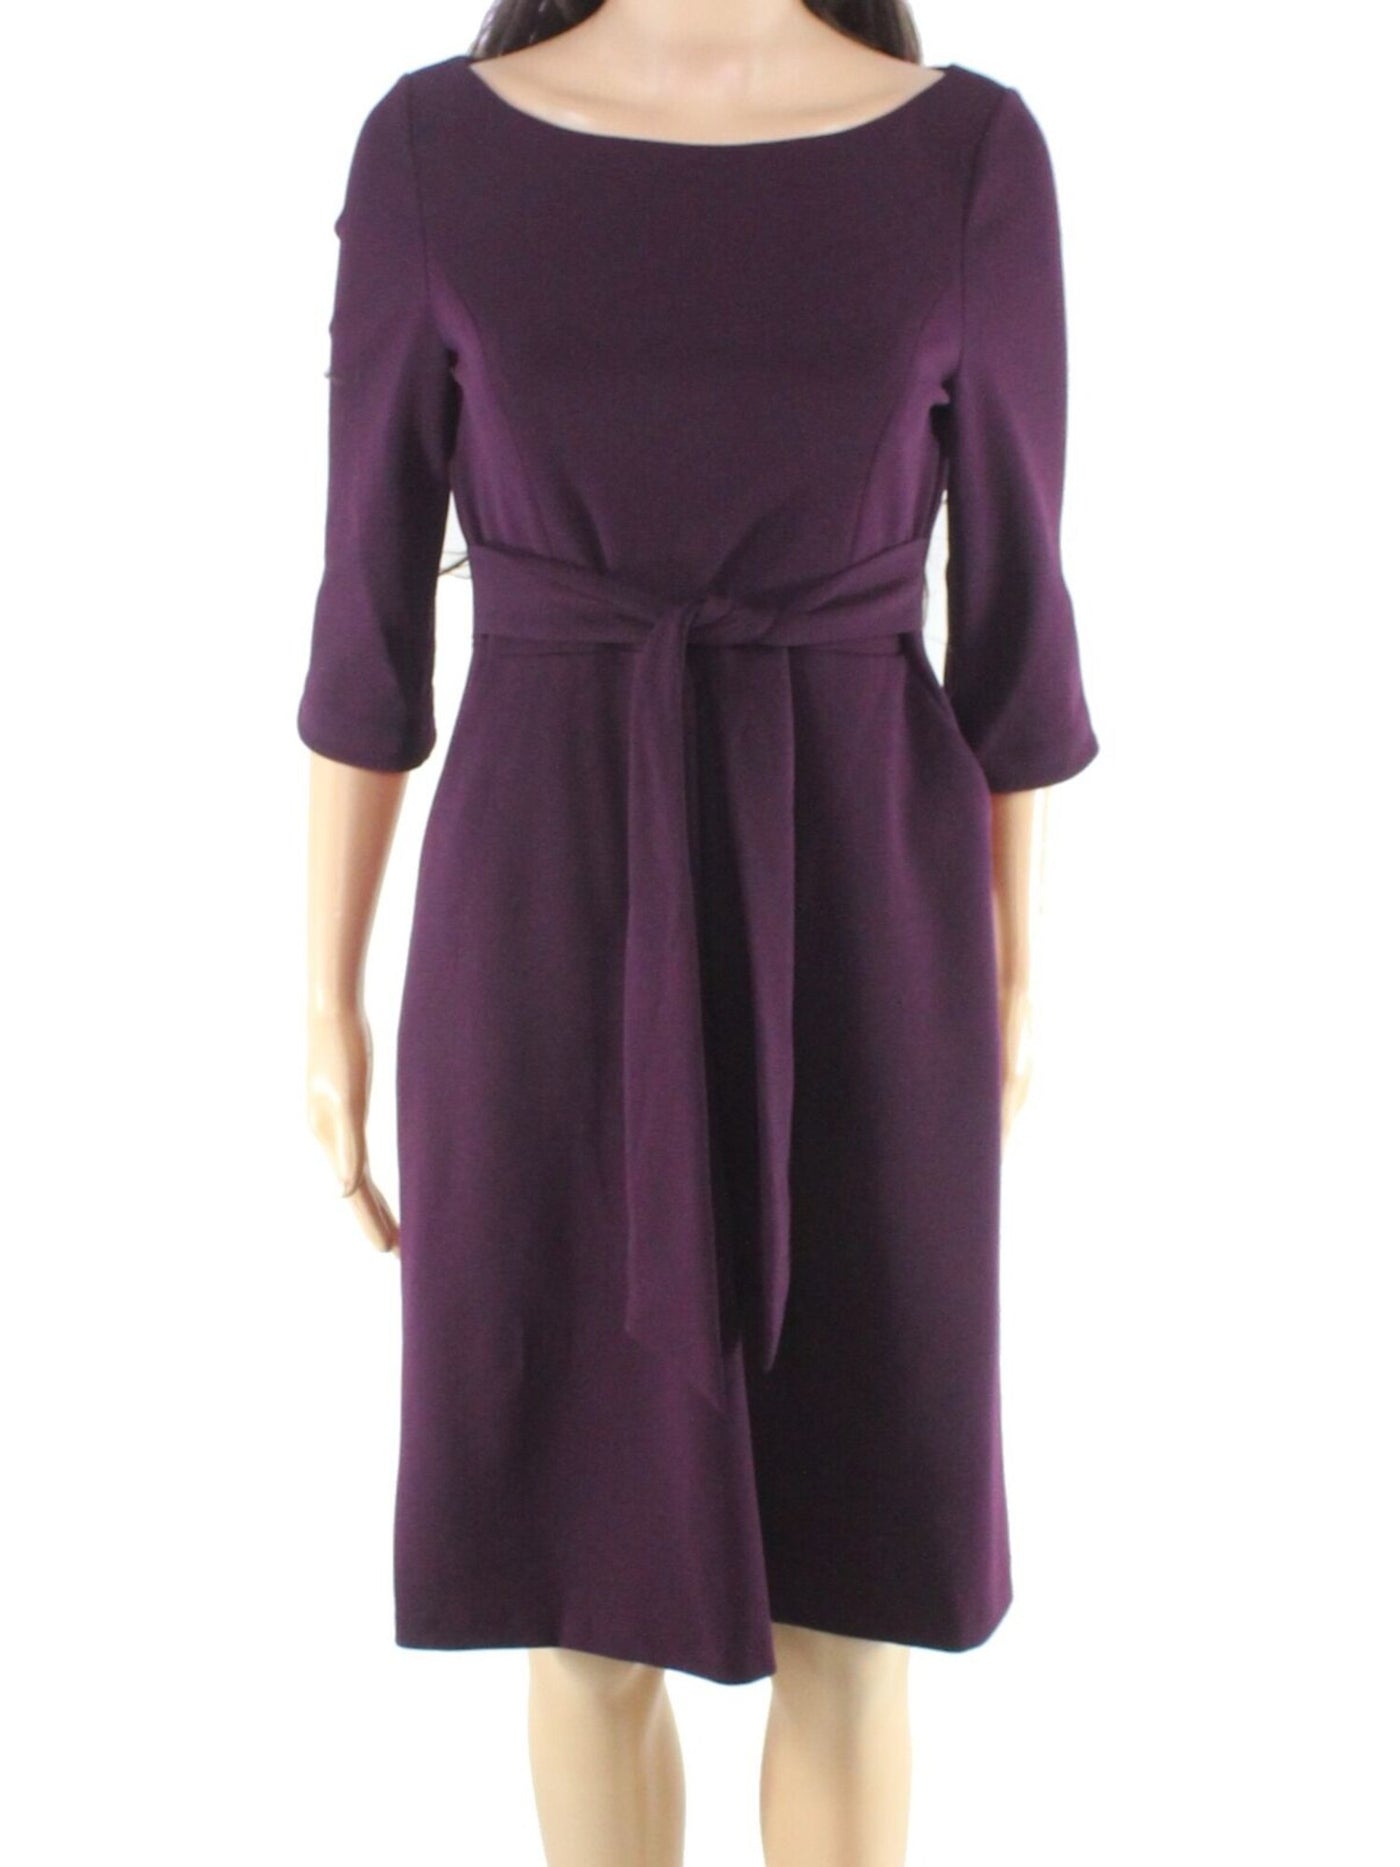 CALVIN KLEIN Womens Burgundy Belted Zippered 3/4 Sleeve Boat Neck Above The Knee Evening Fit + Flare Dress 10